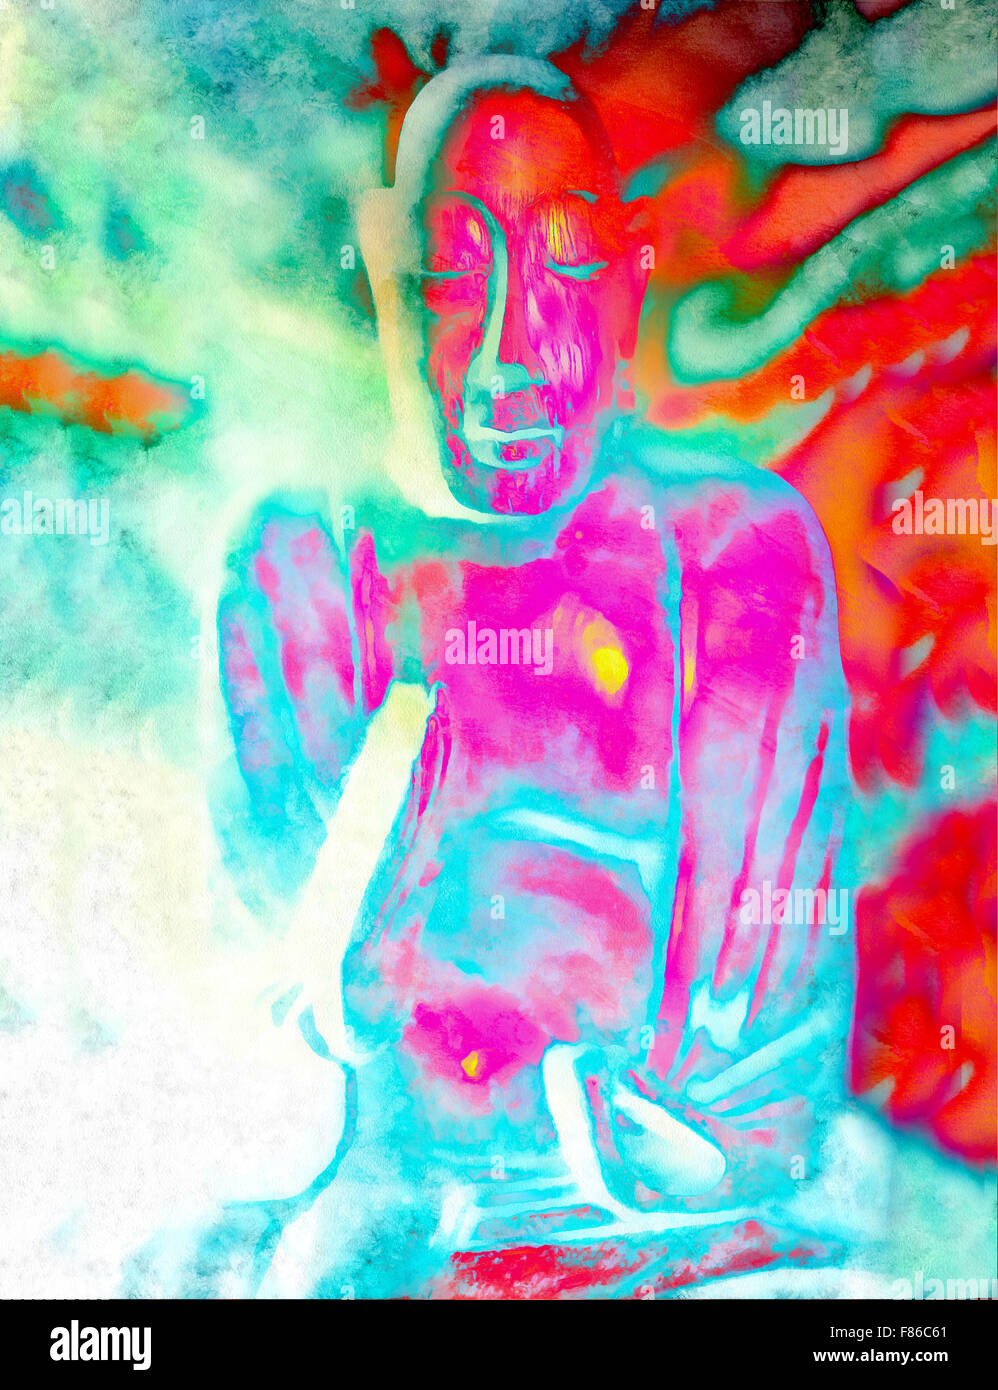 Buddha silhouette in lotus position against colorful grunge background Stock Photo